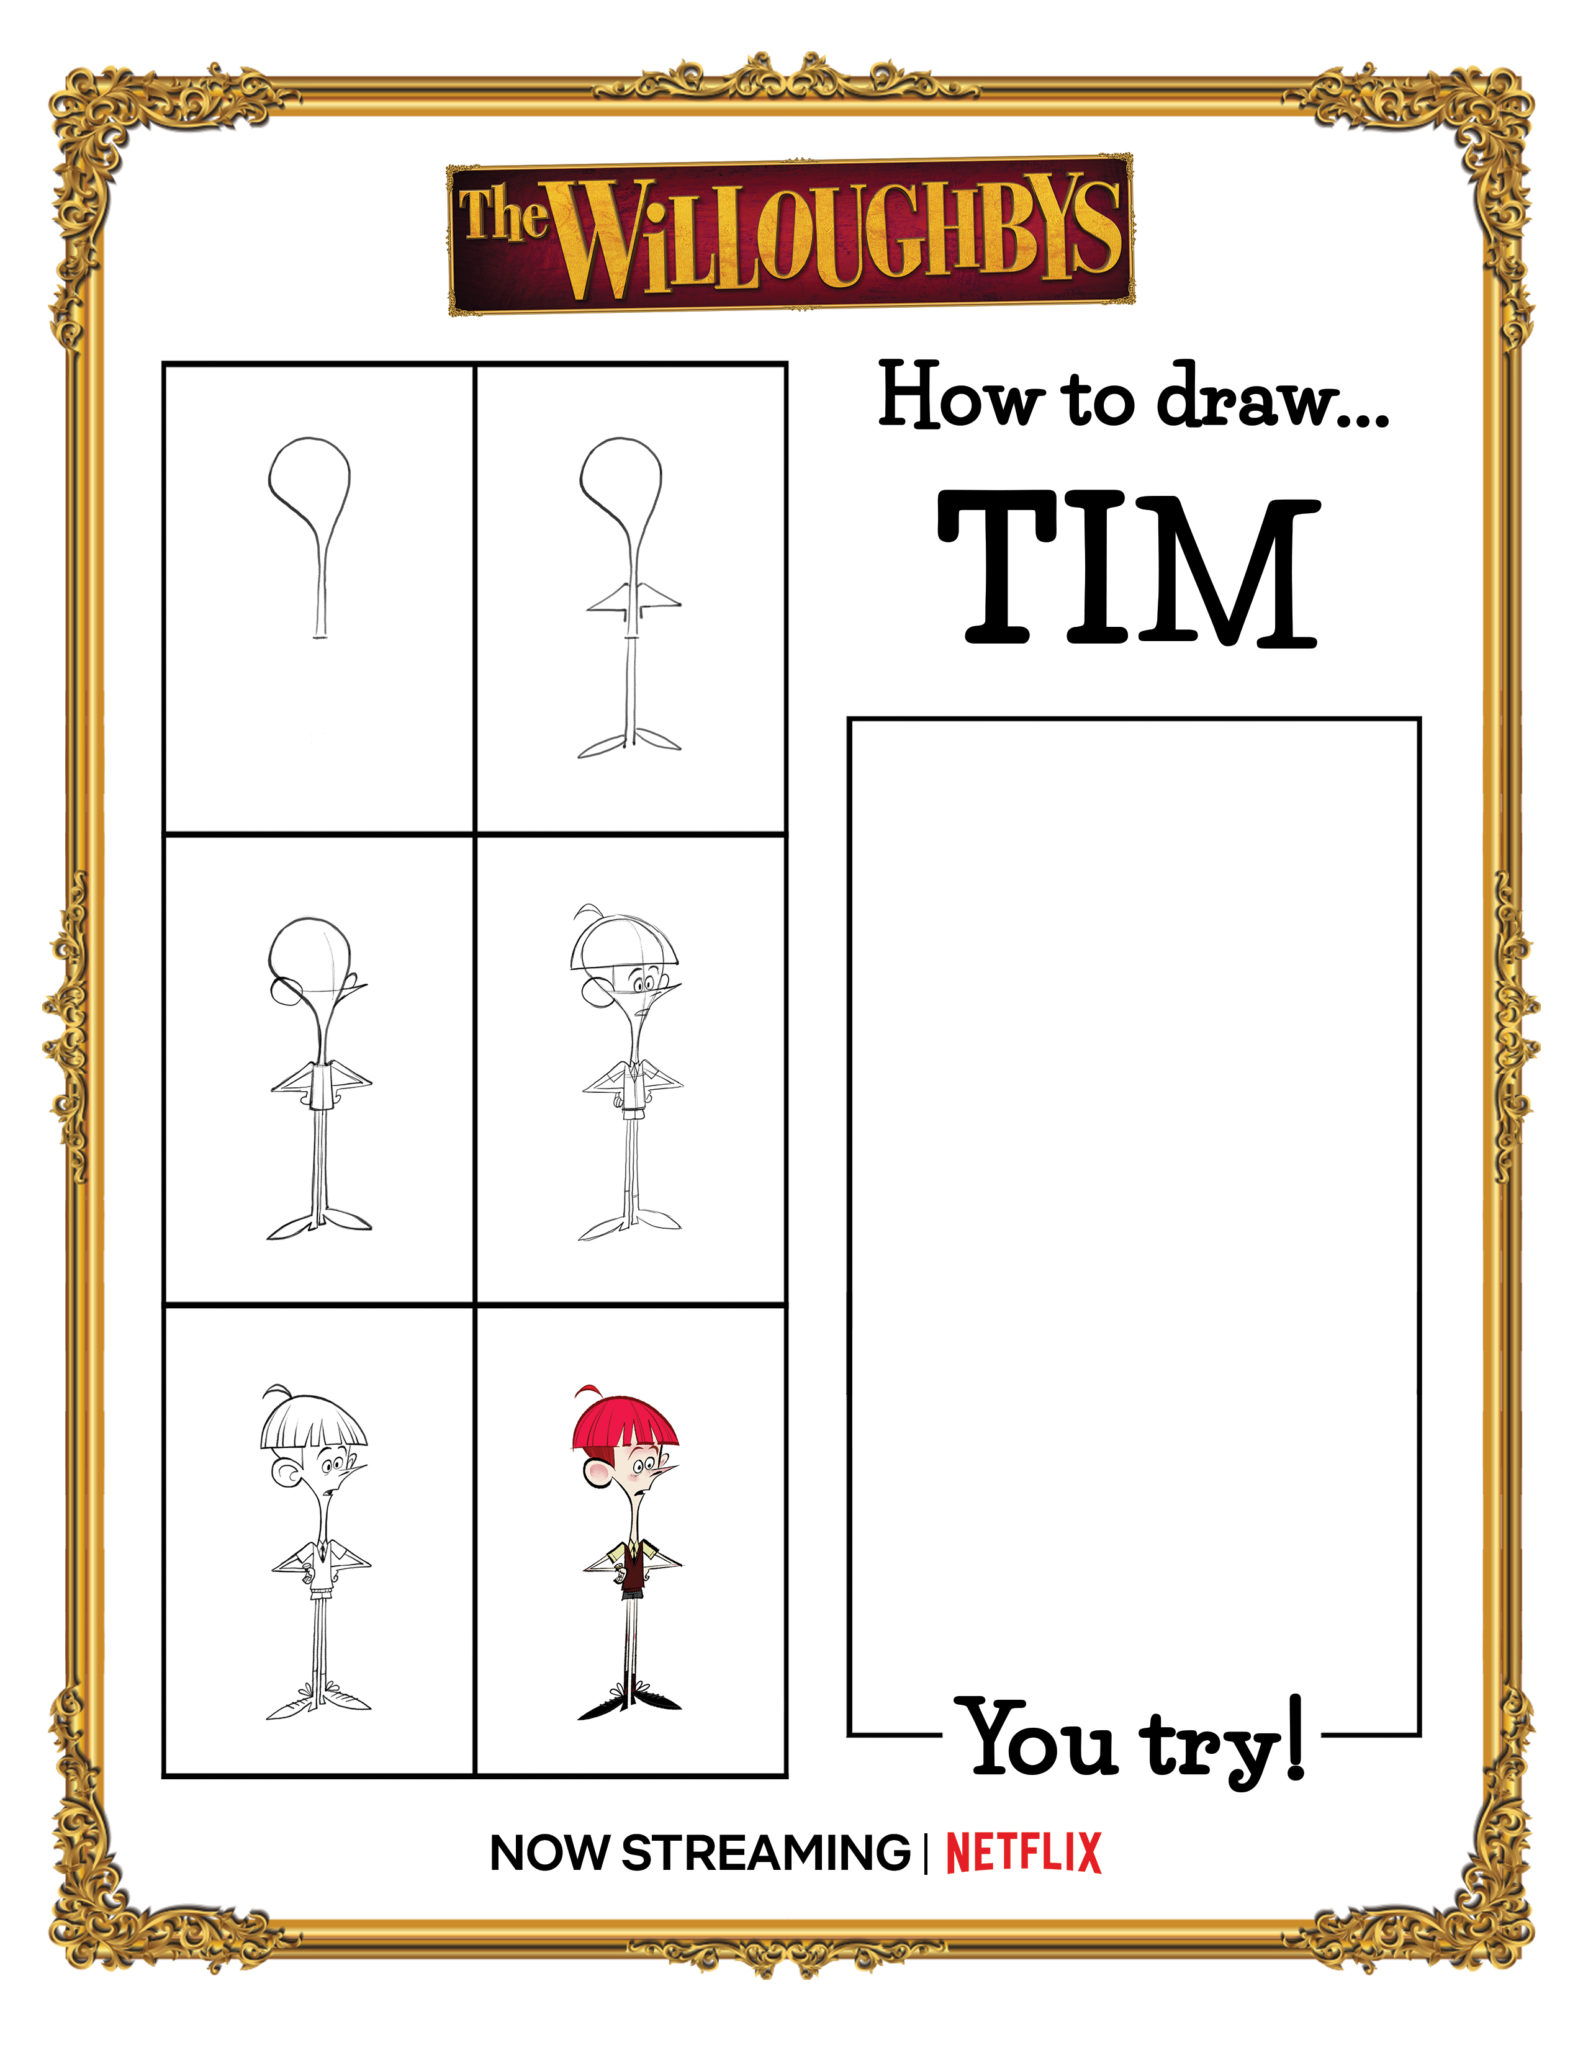 Learn How to Draw THE WILLOUGHBYS